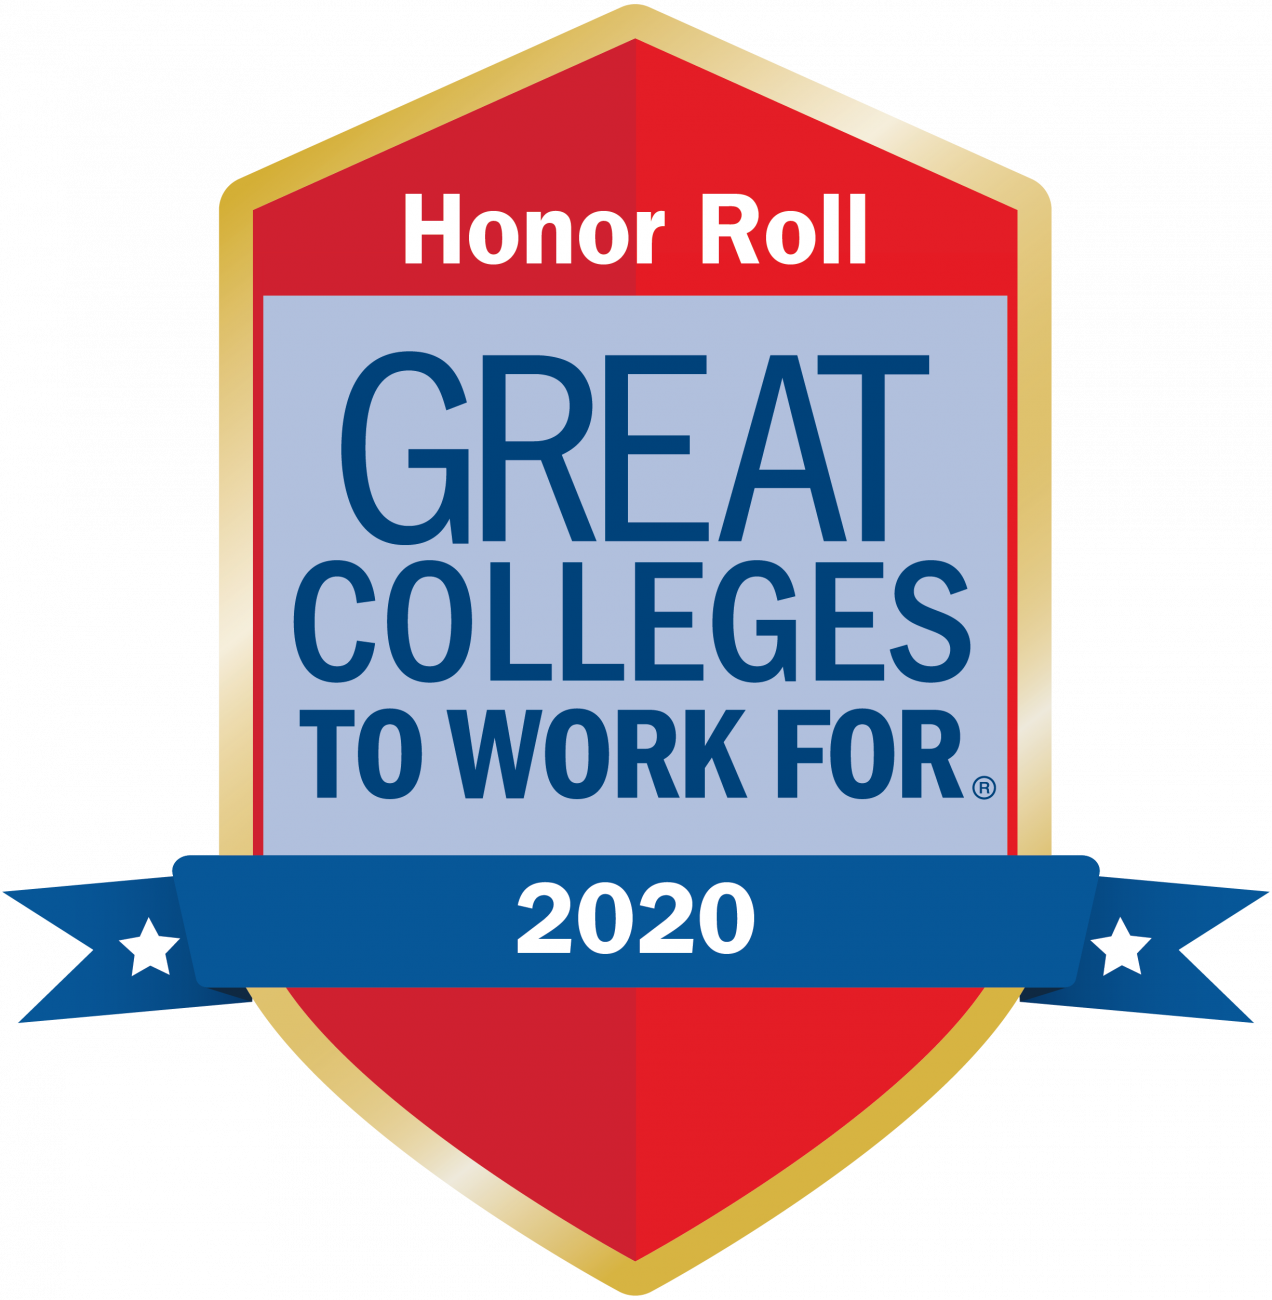 Great Colleges to Work For 2020 Honor Roll badge